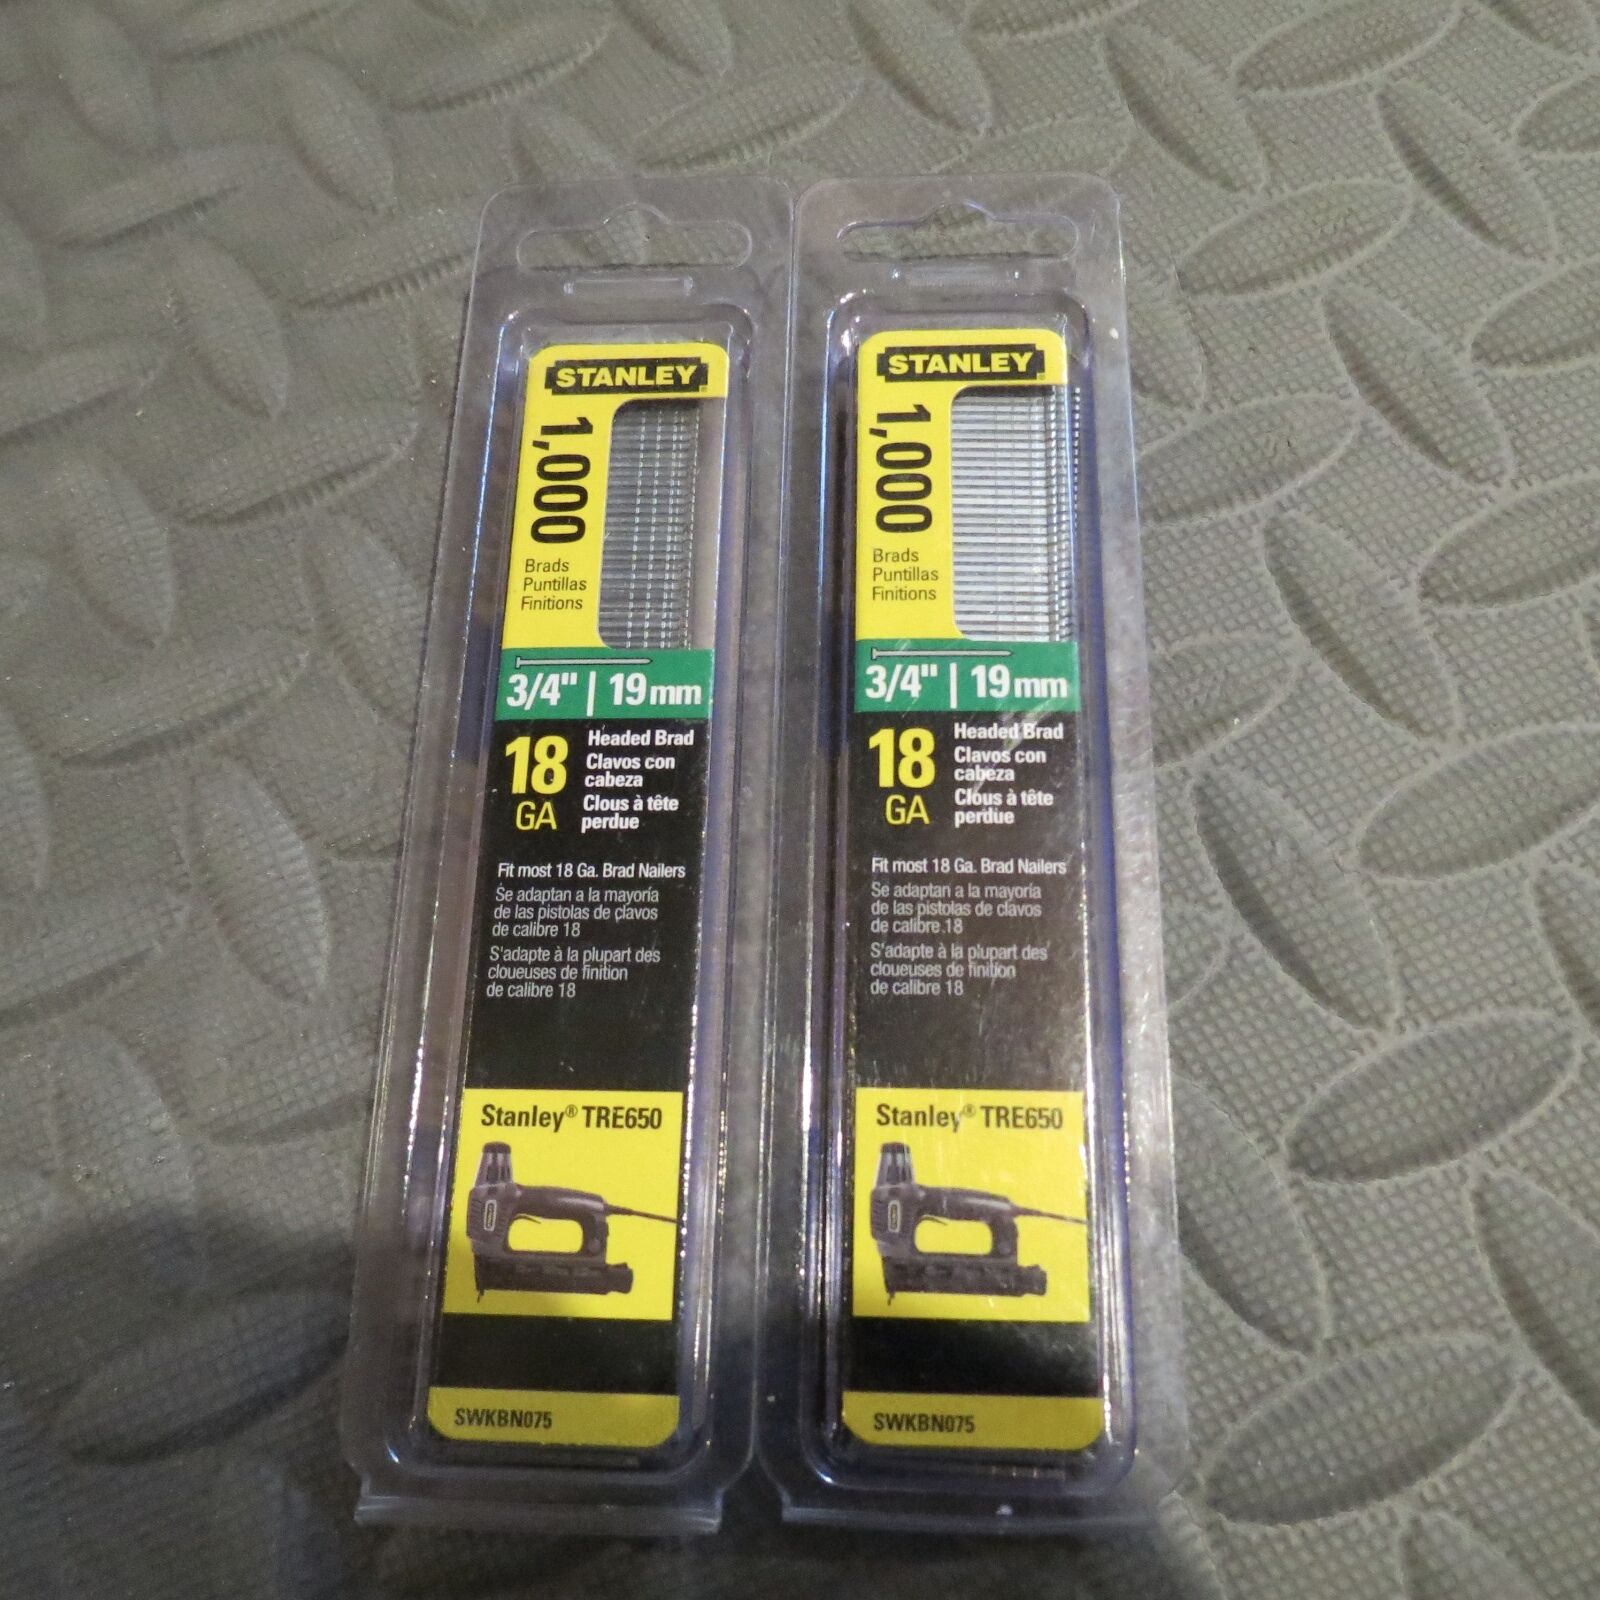 Stanley Brad 3/4" or 19mm 18 GA (lot#6758) (you get two packs)